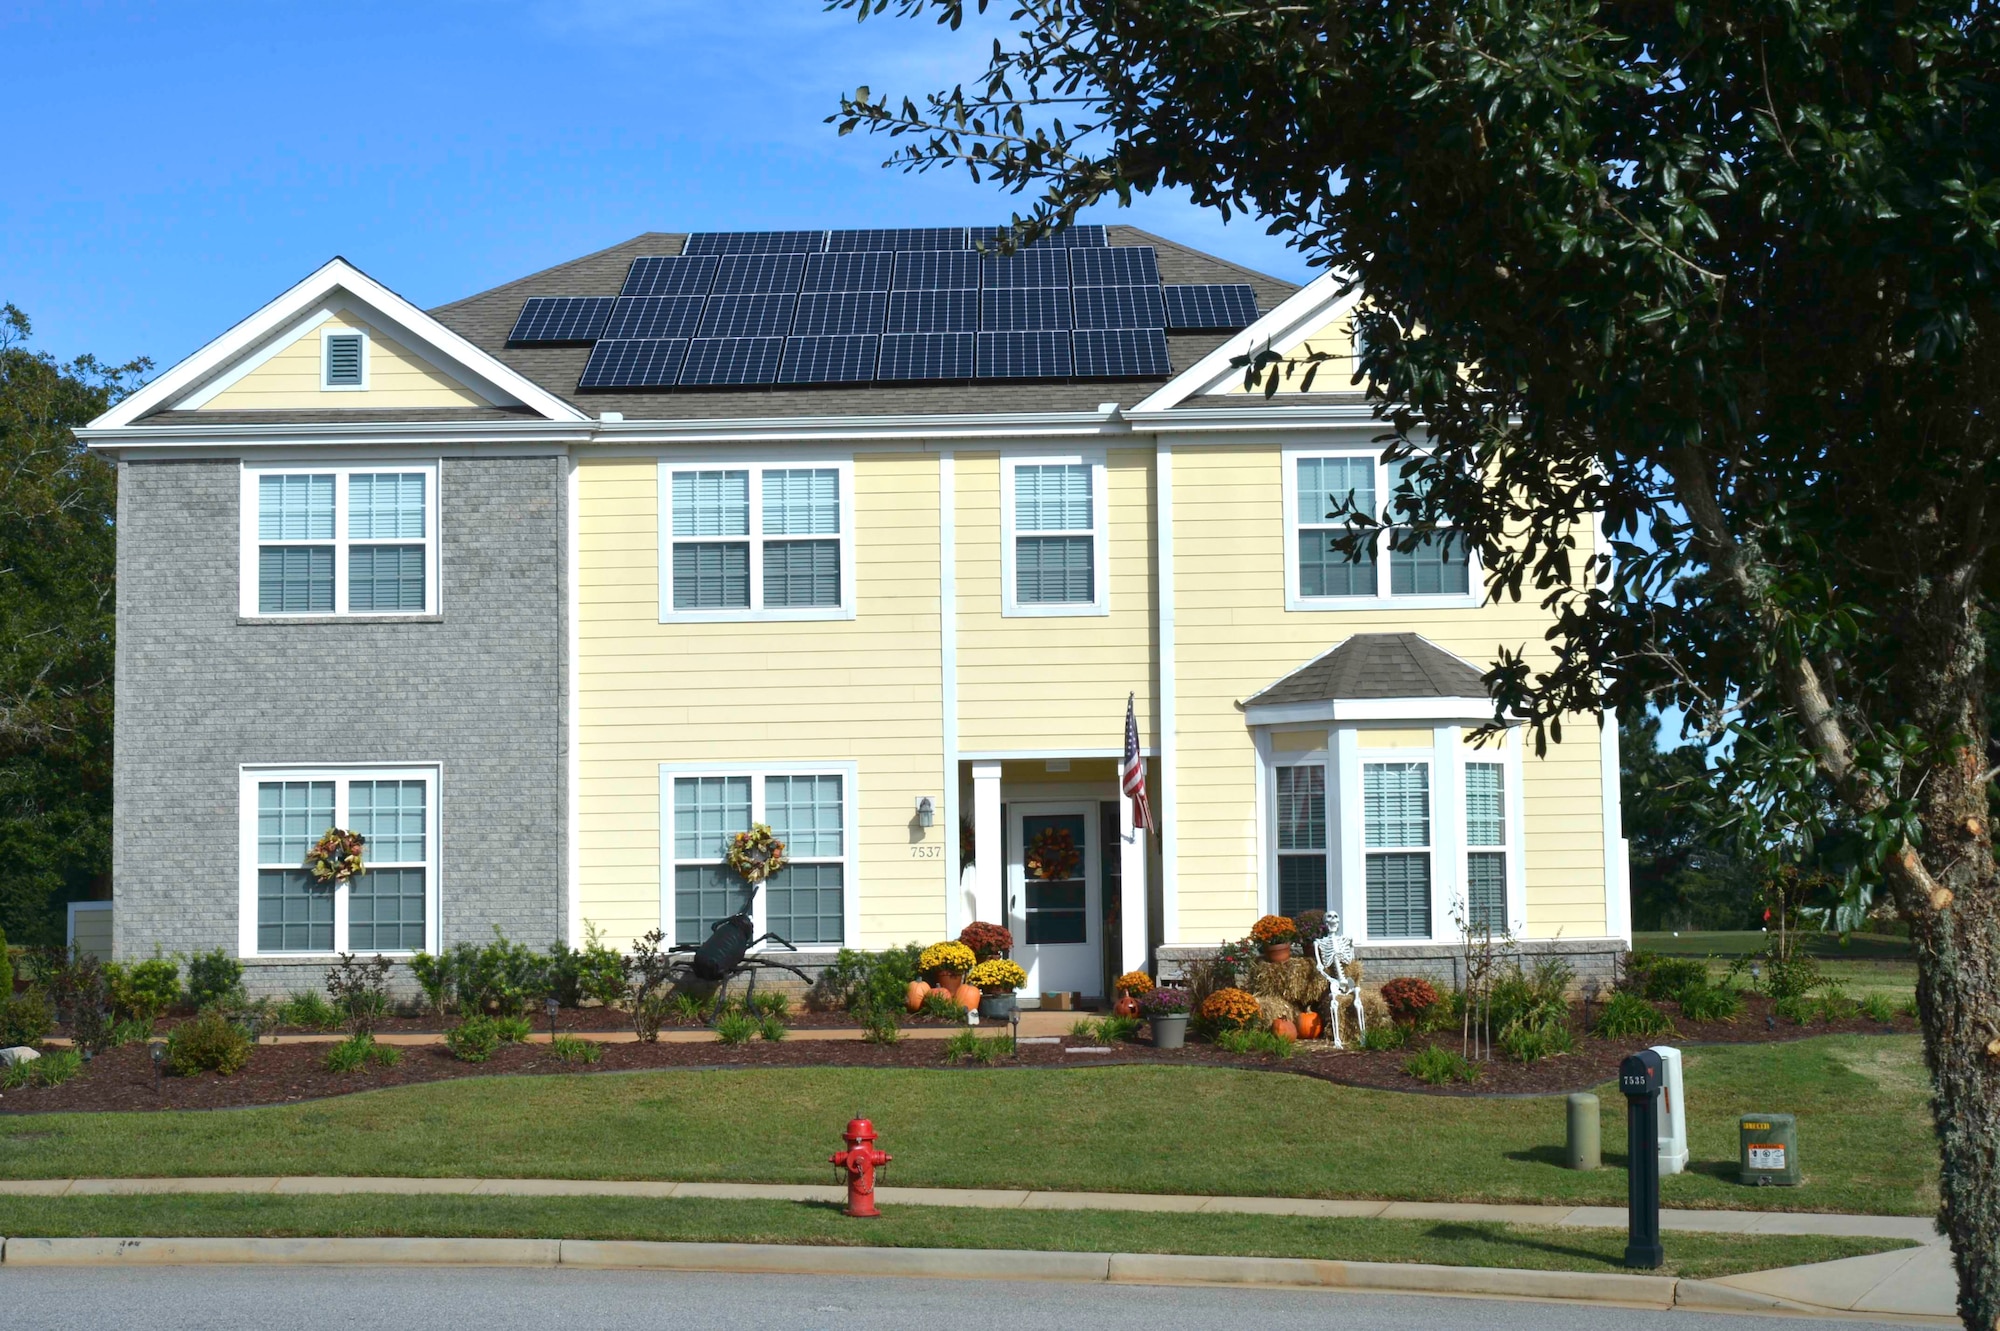 The project included the installation of 5,865 solar panels in 284 homes, accumulating an approximate 40 percent offset of total annual electrical consumption. A first for military housing in the state of South Carolina, the project solidifies the state as eighth in the nation for installed solar power capacity.